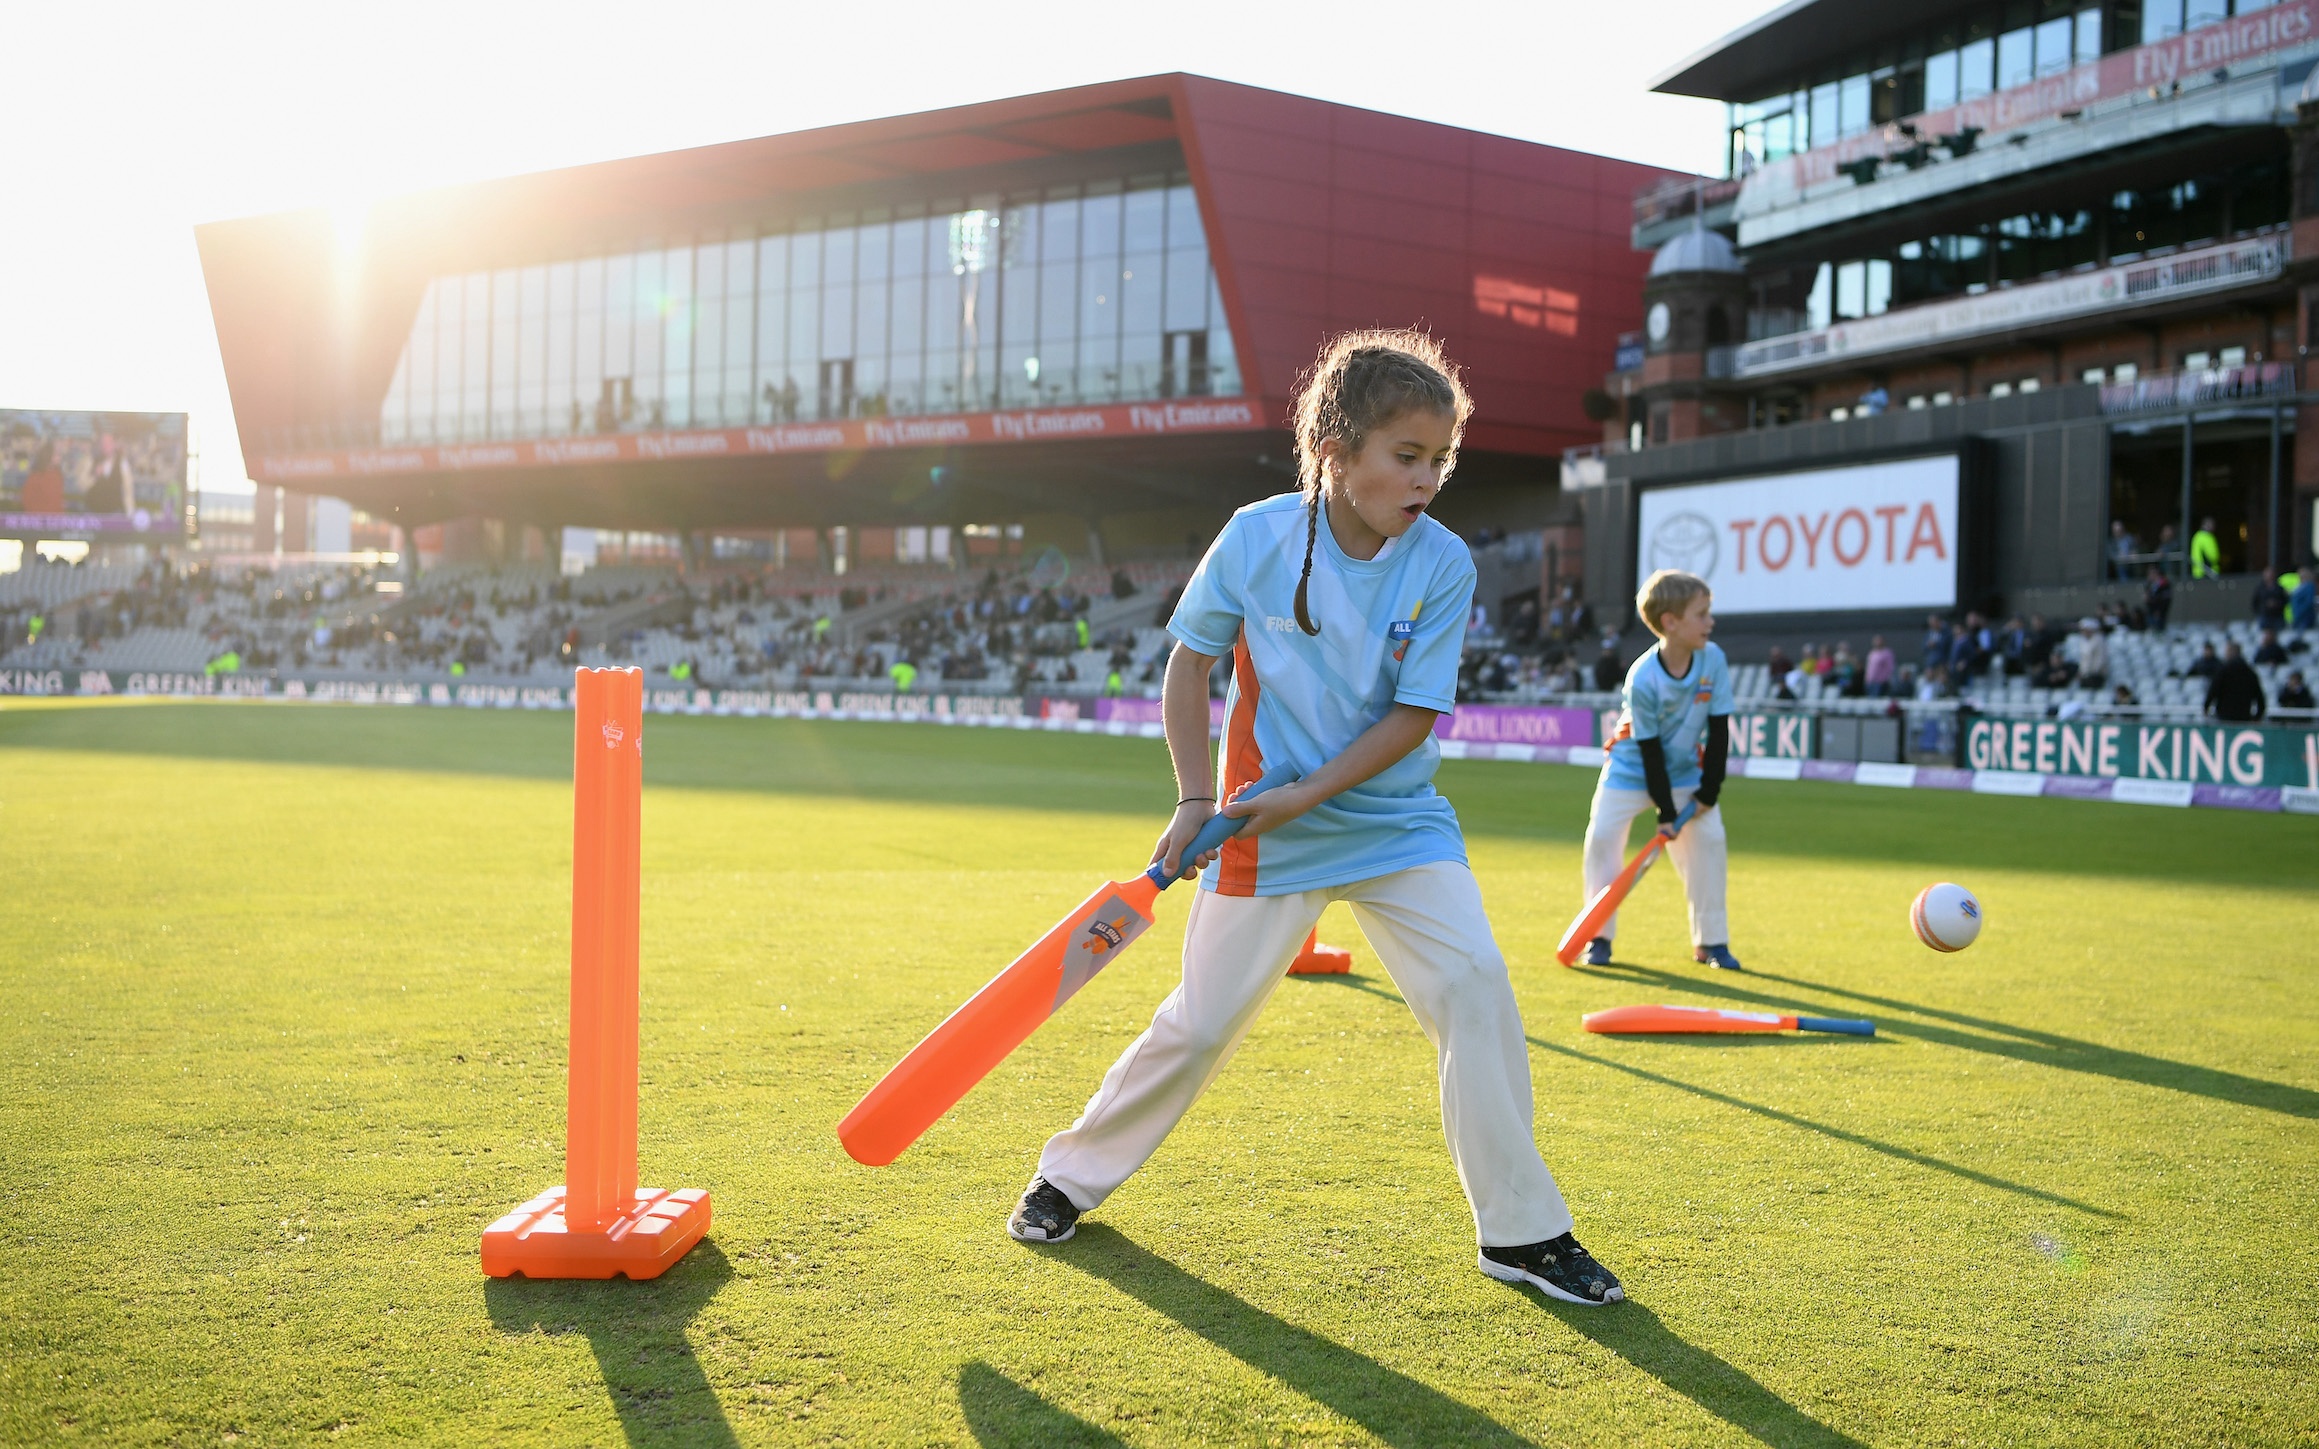 Lancashire Cricket Foundation offering free cricket to kids in Greater Manchester